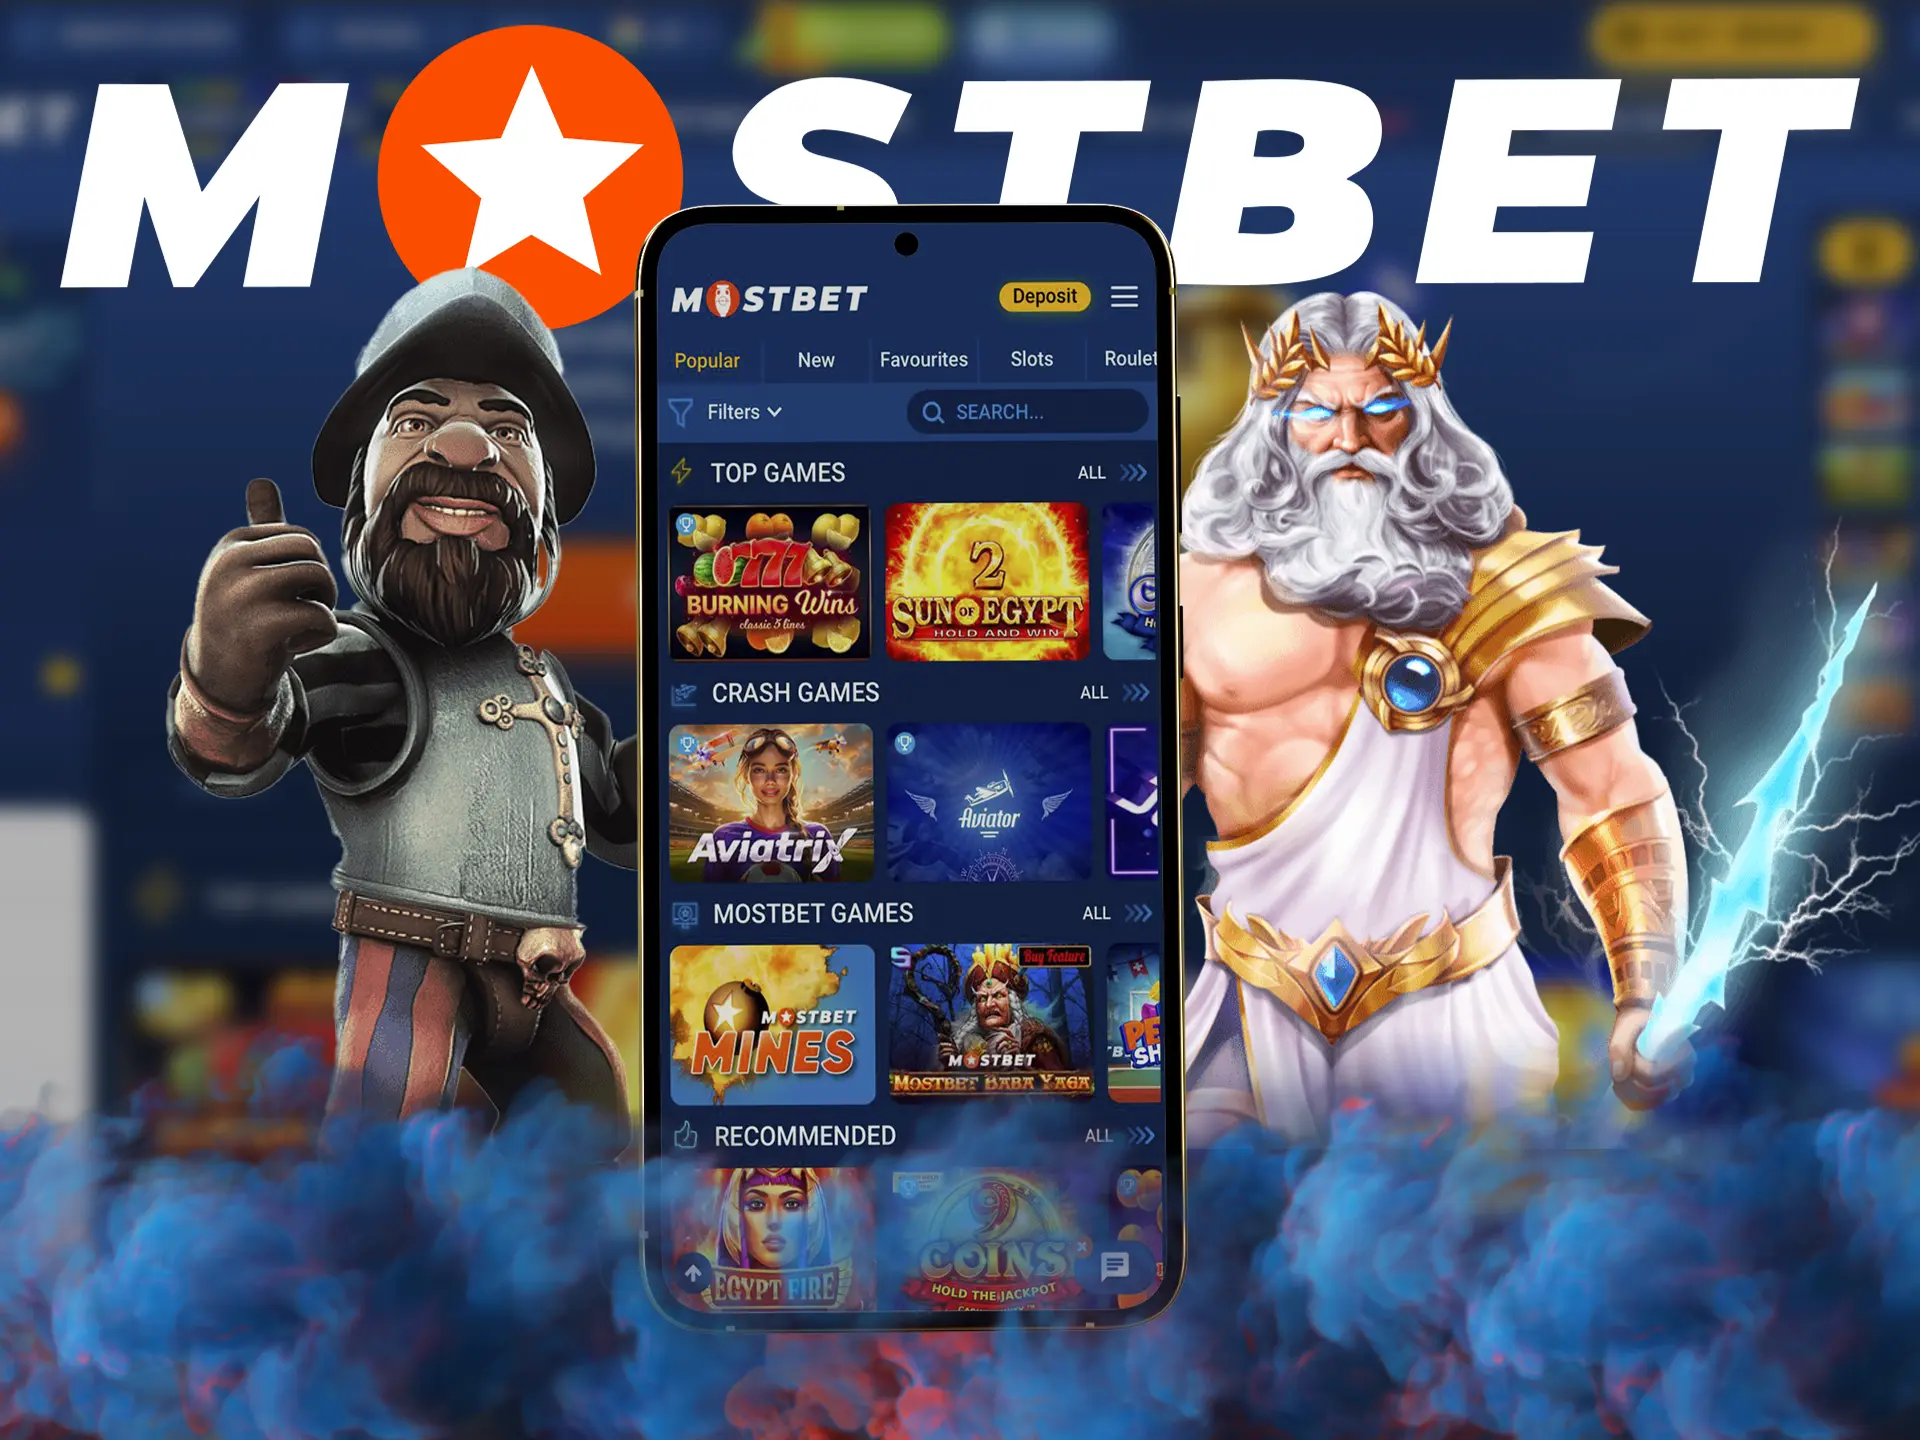 Slots fans will have no problem finding their favourite game at Mostbet casino.